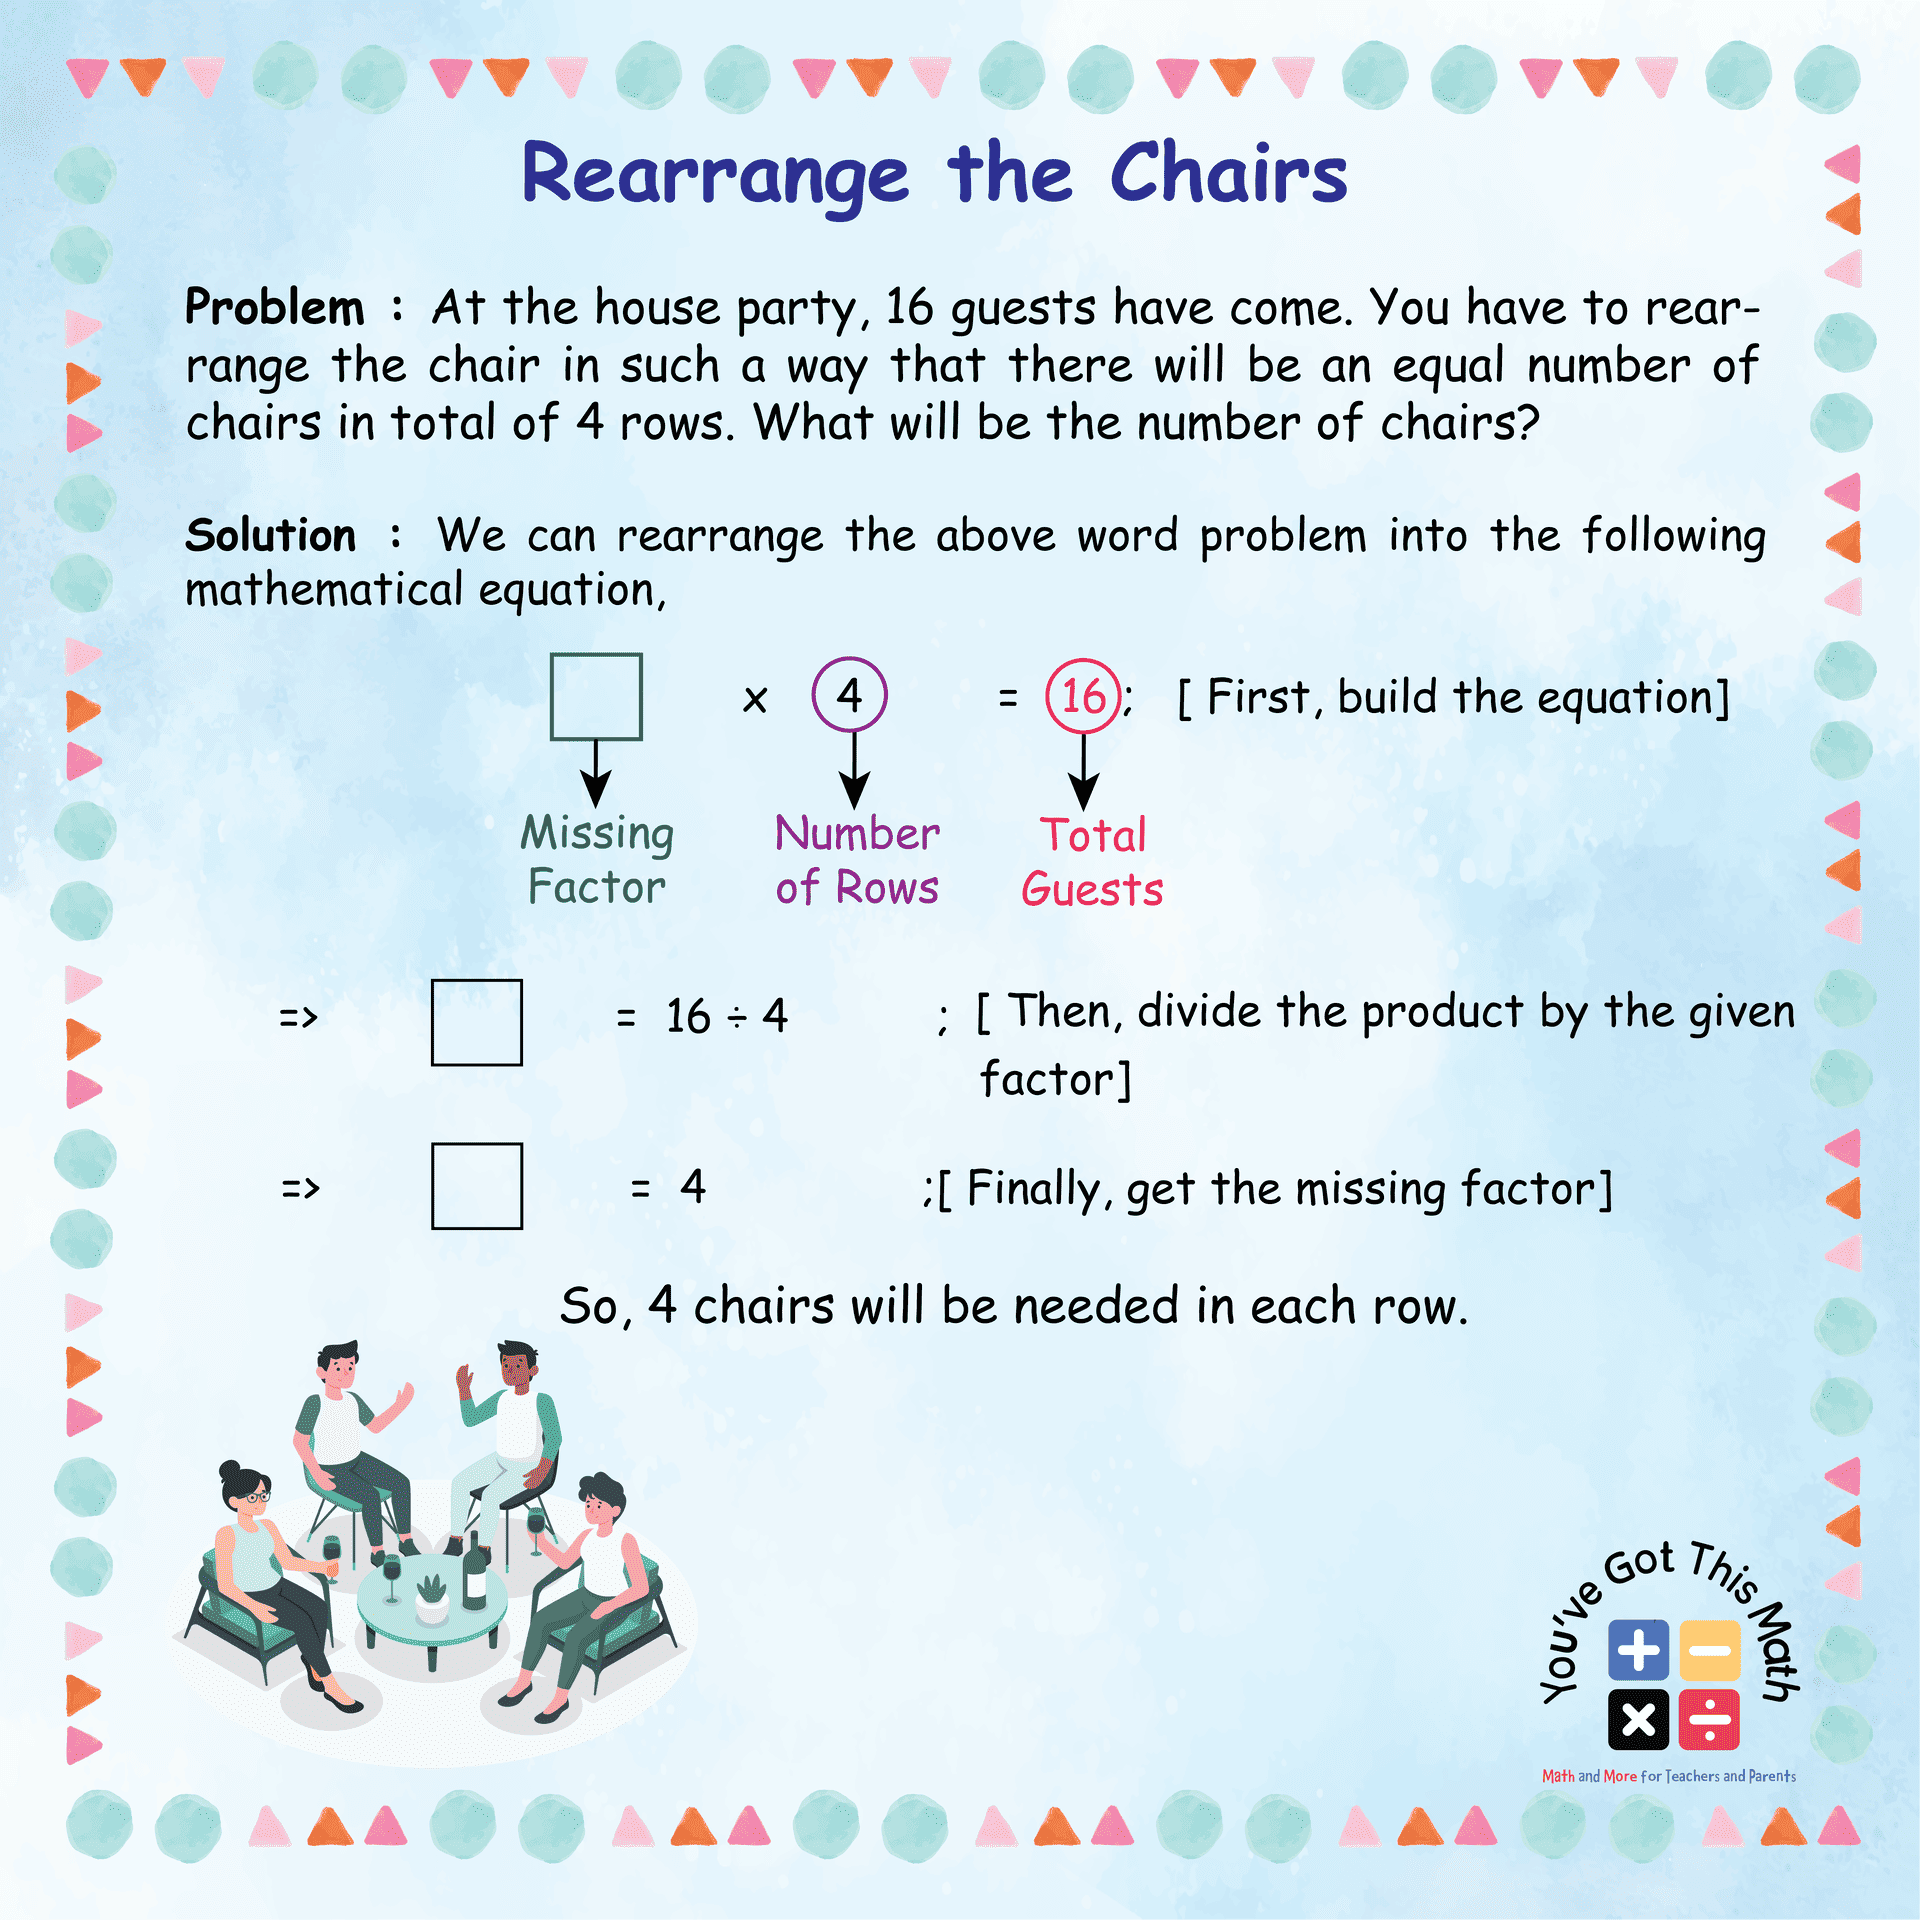 Finding Missing Factor to Rearrange Chairs